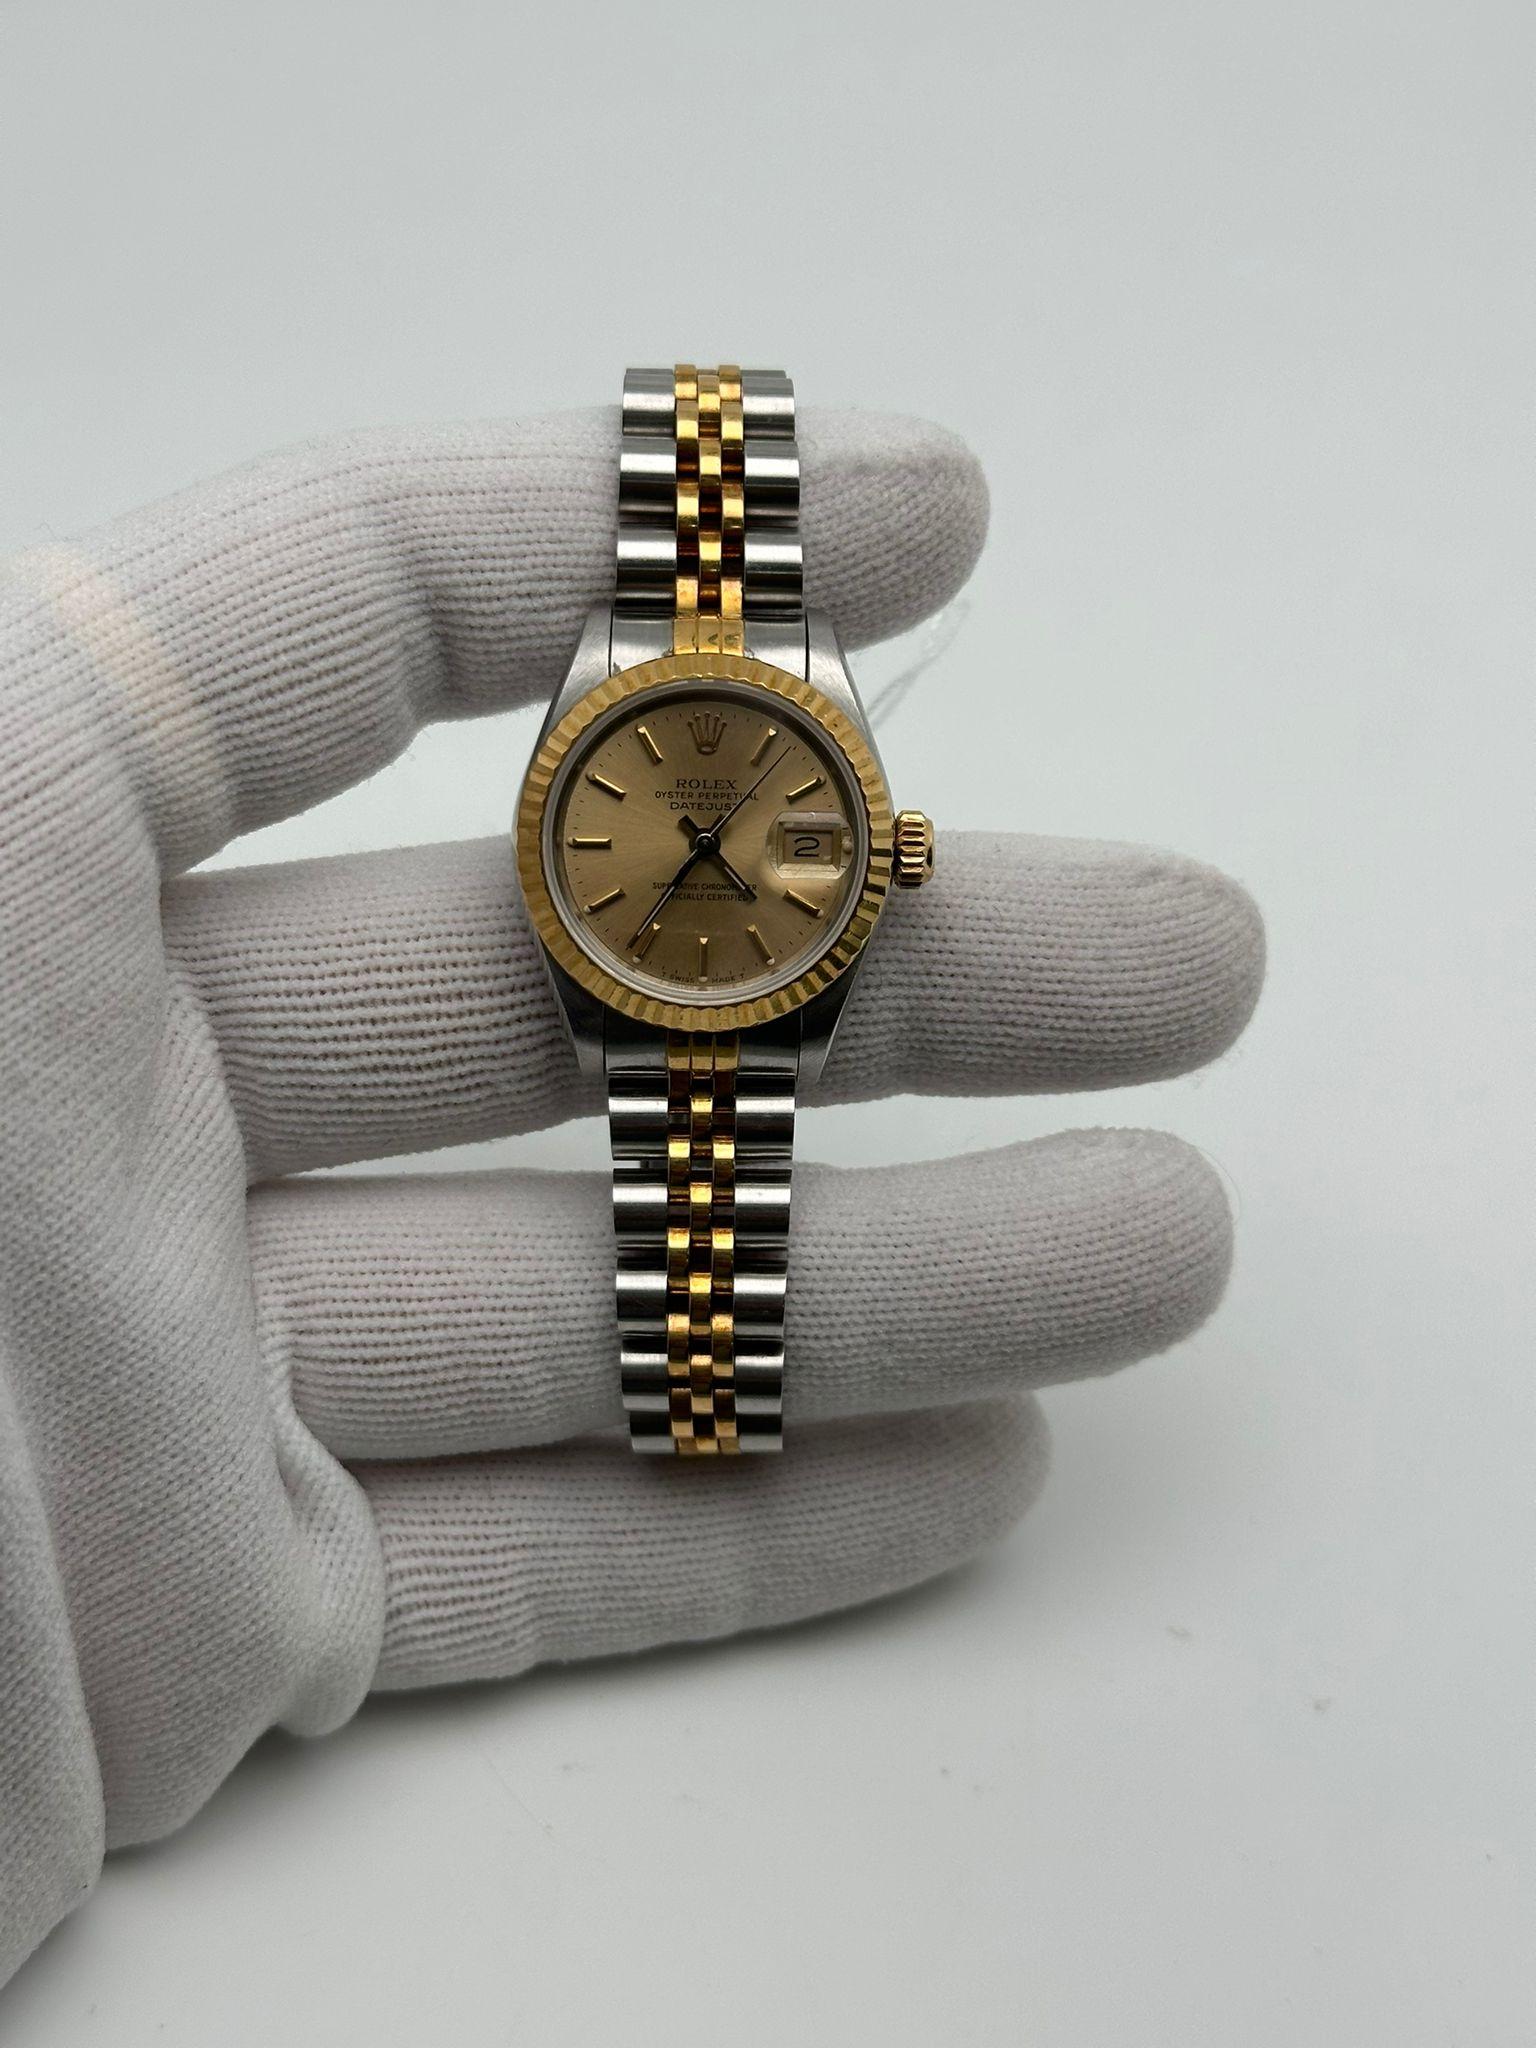 Rolex Datejust 18k Yellow Gold Holes Case Champagne Dial Ladies Watch 69173 For Sale 4